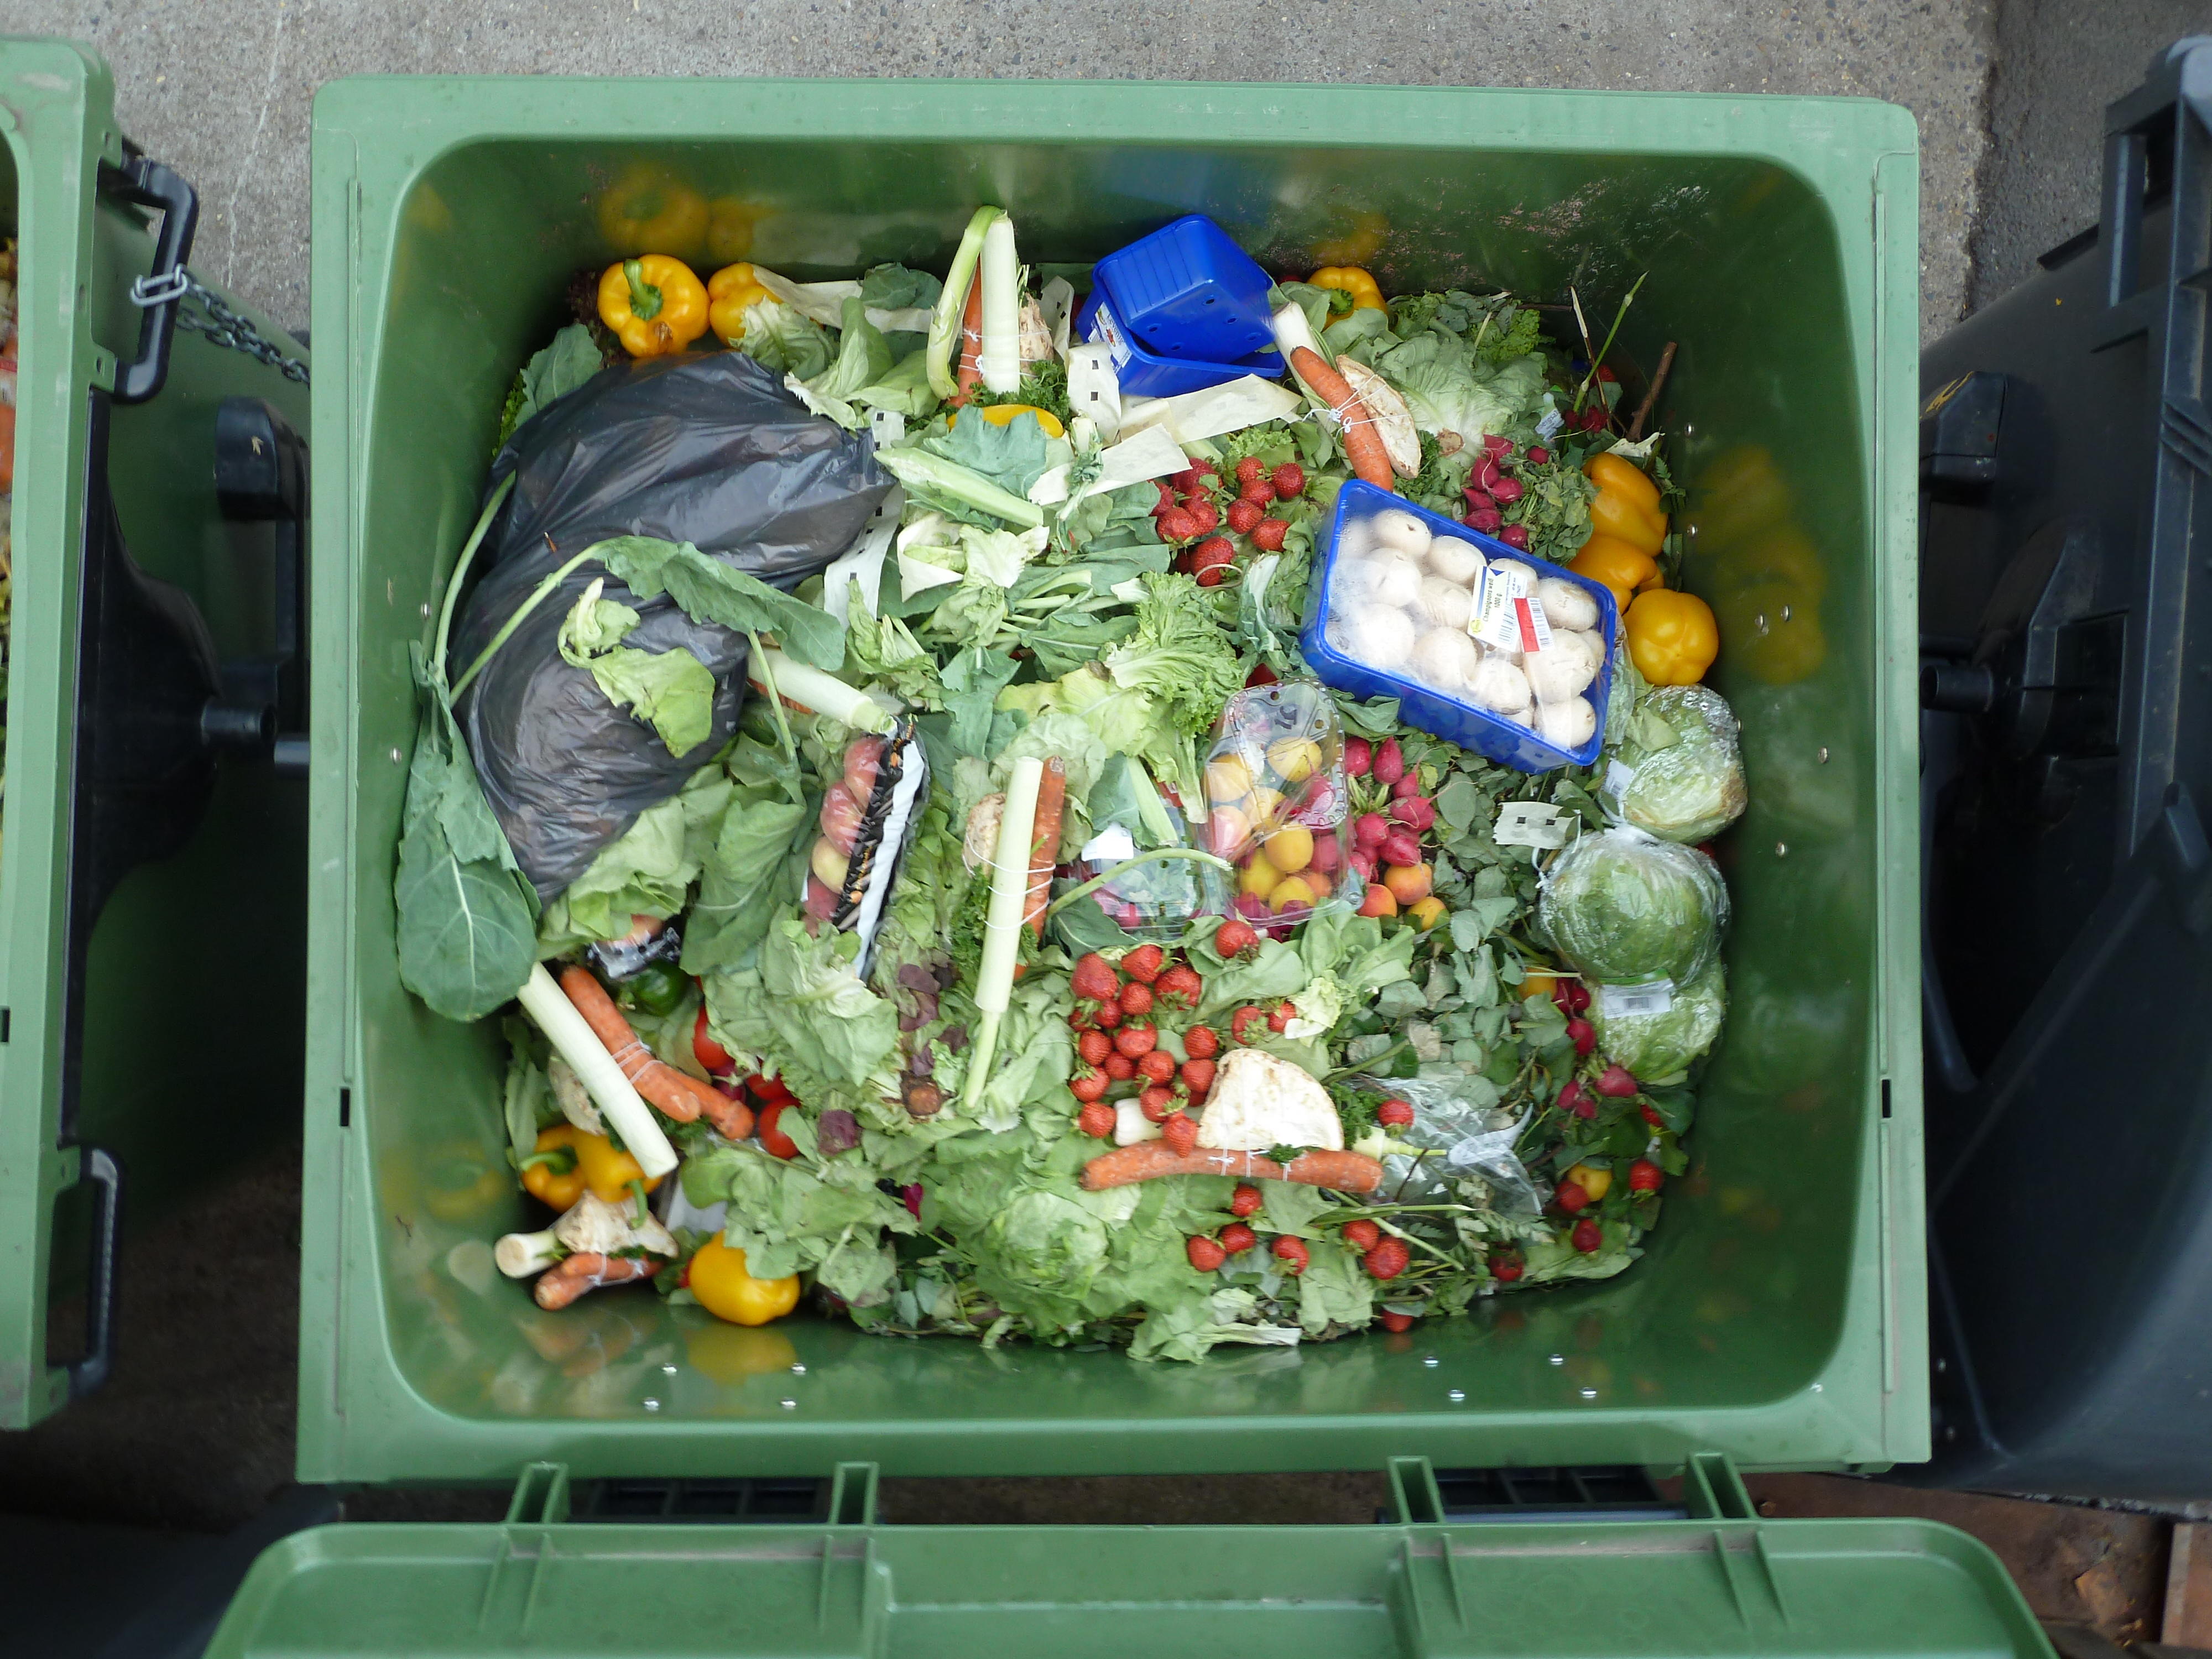 Businesses avoiding France's new food waste law could face up to $4500 for each infraction.